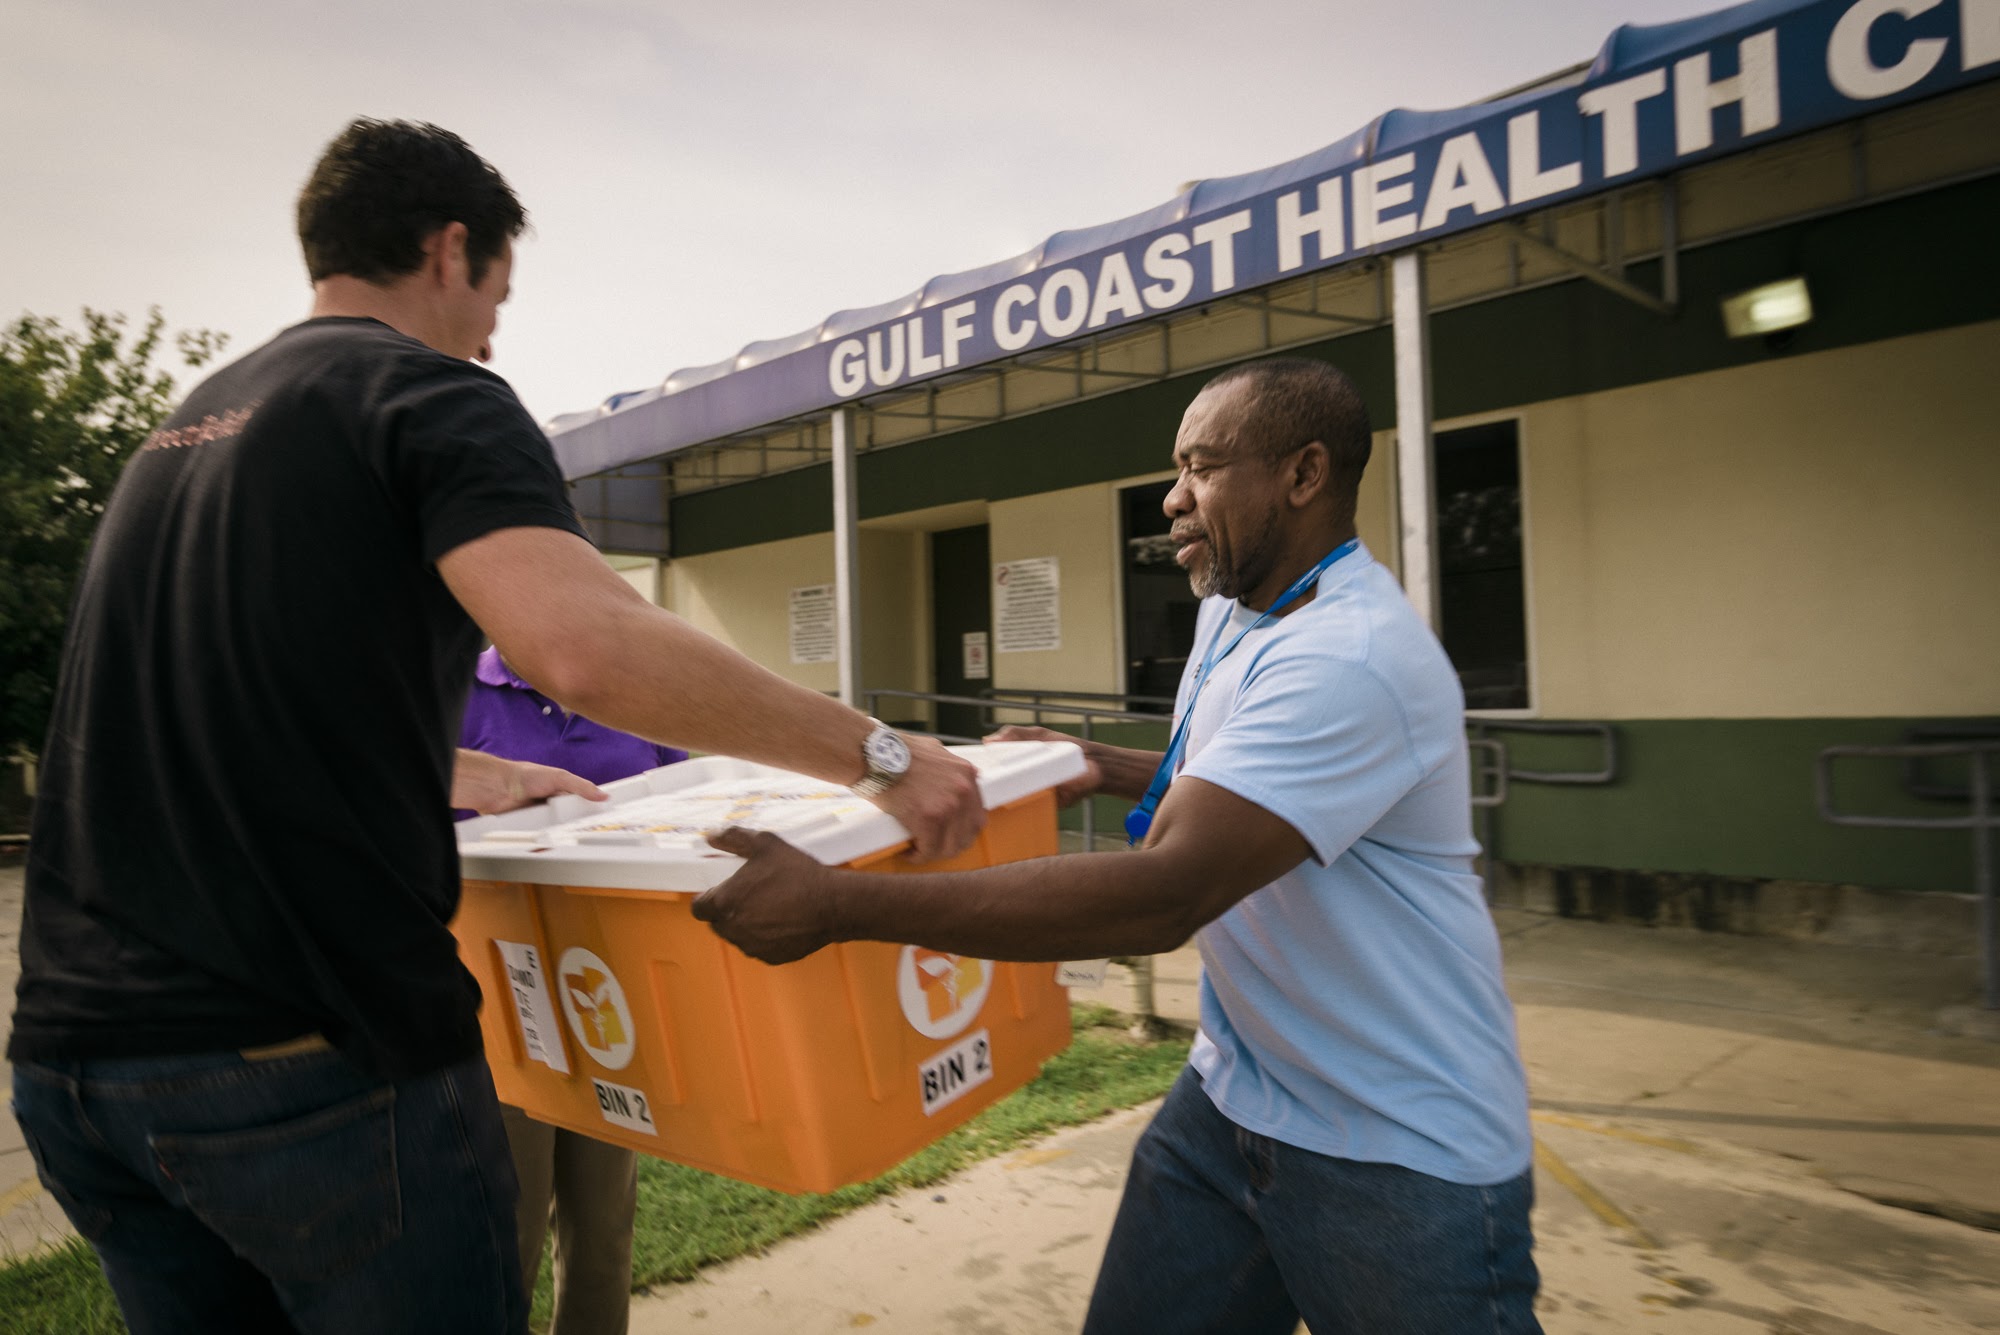 Emergency medicines were handed off to staff at the Gulf Coast Health Cente...